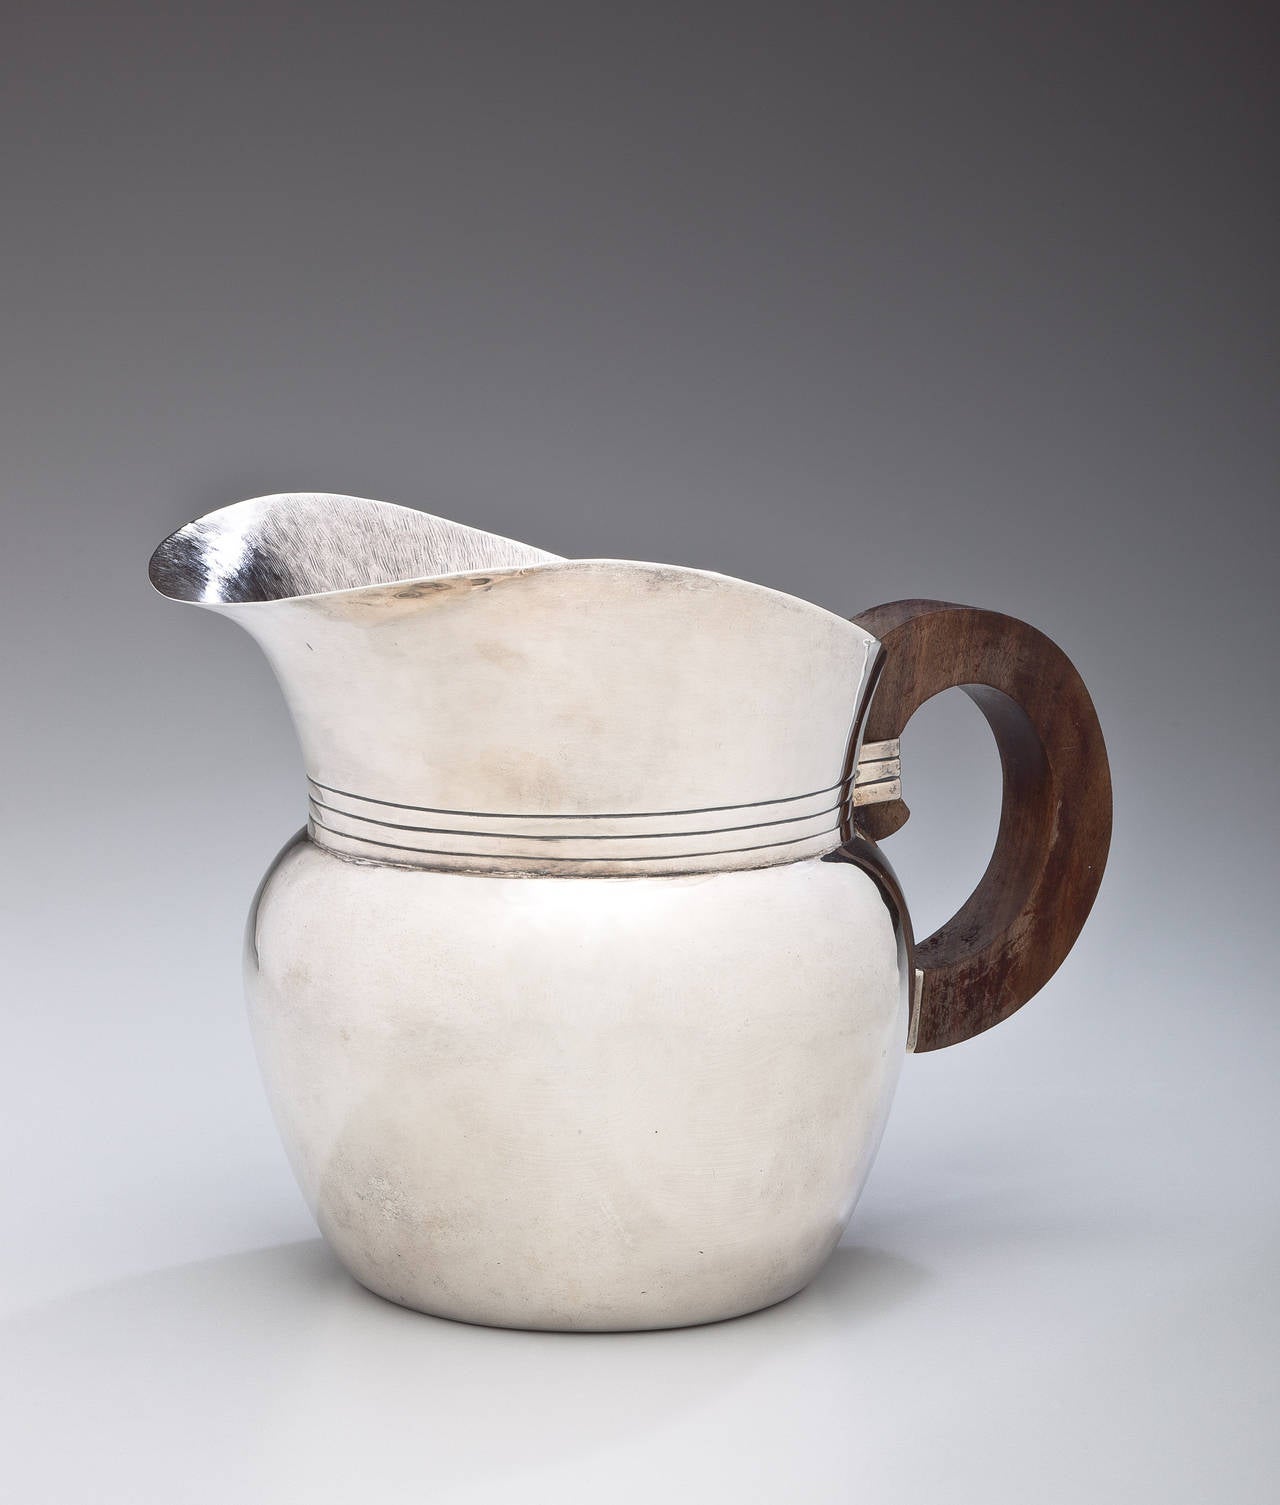 A pitcher in sterling silver and rosewood by William Spratling (1900-1967). Called the 